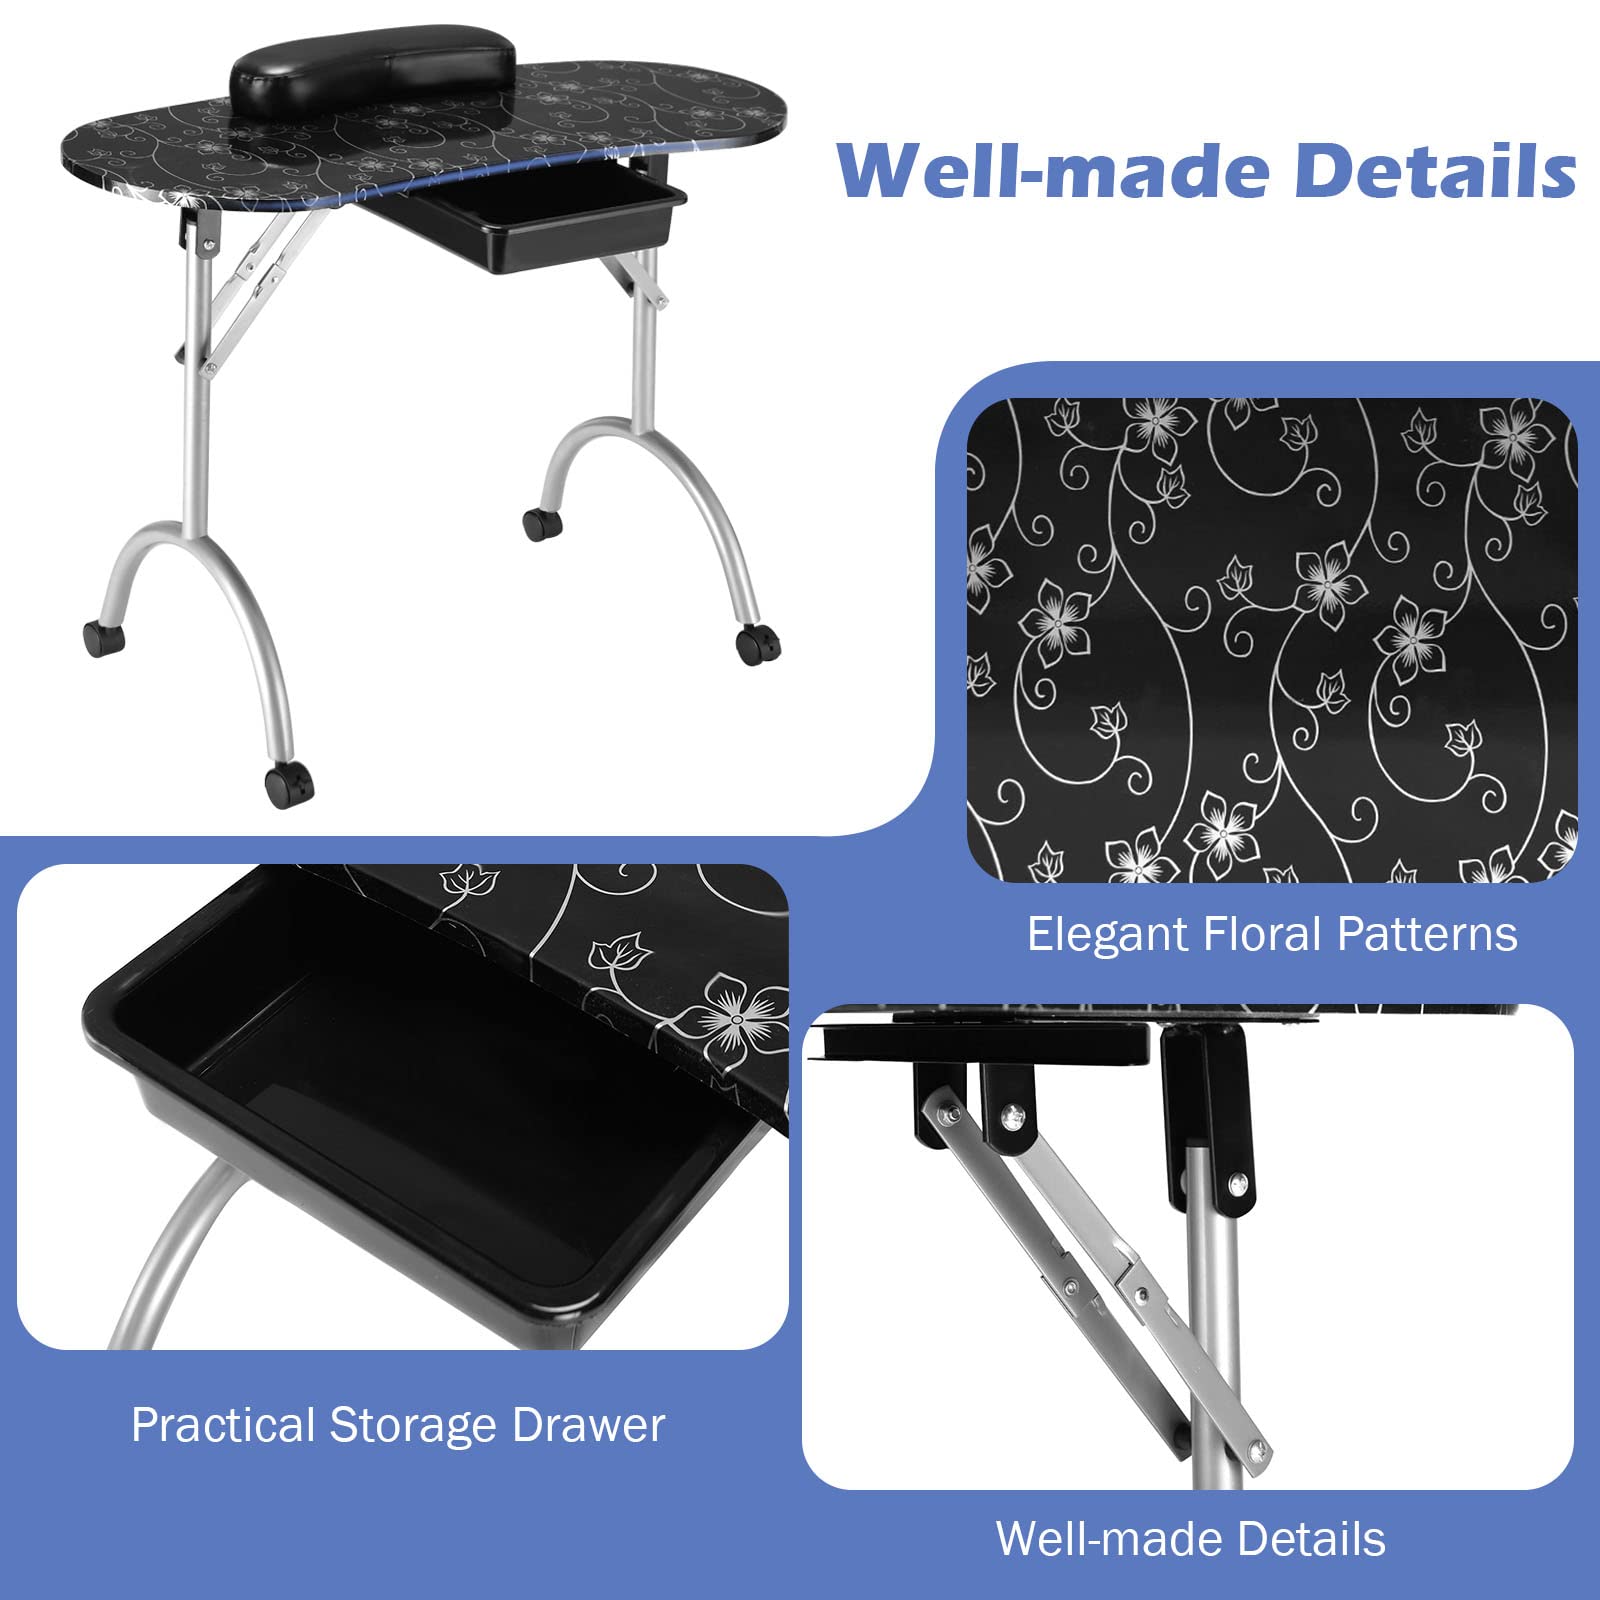 Foldable Nail Table Workstation with Lockable Wheels